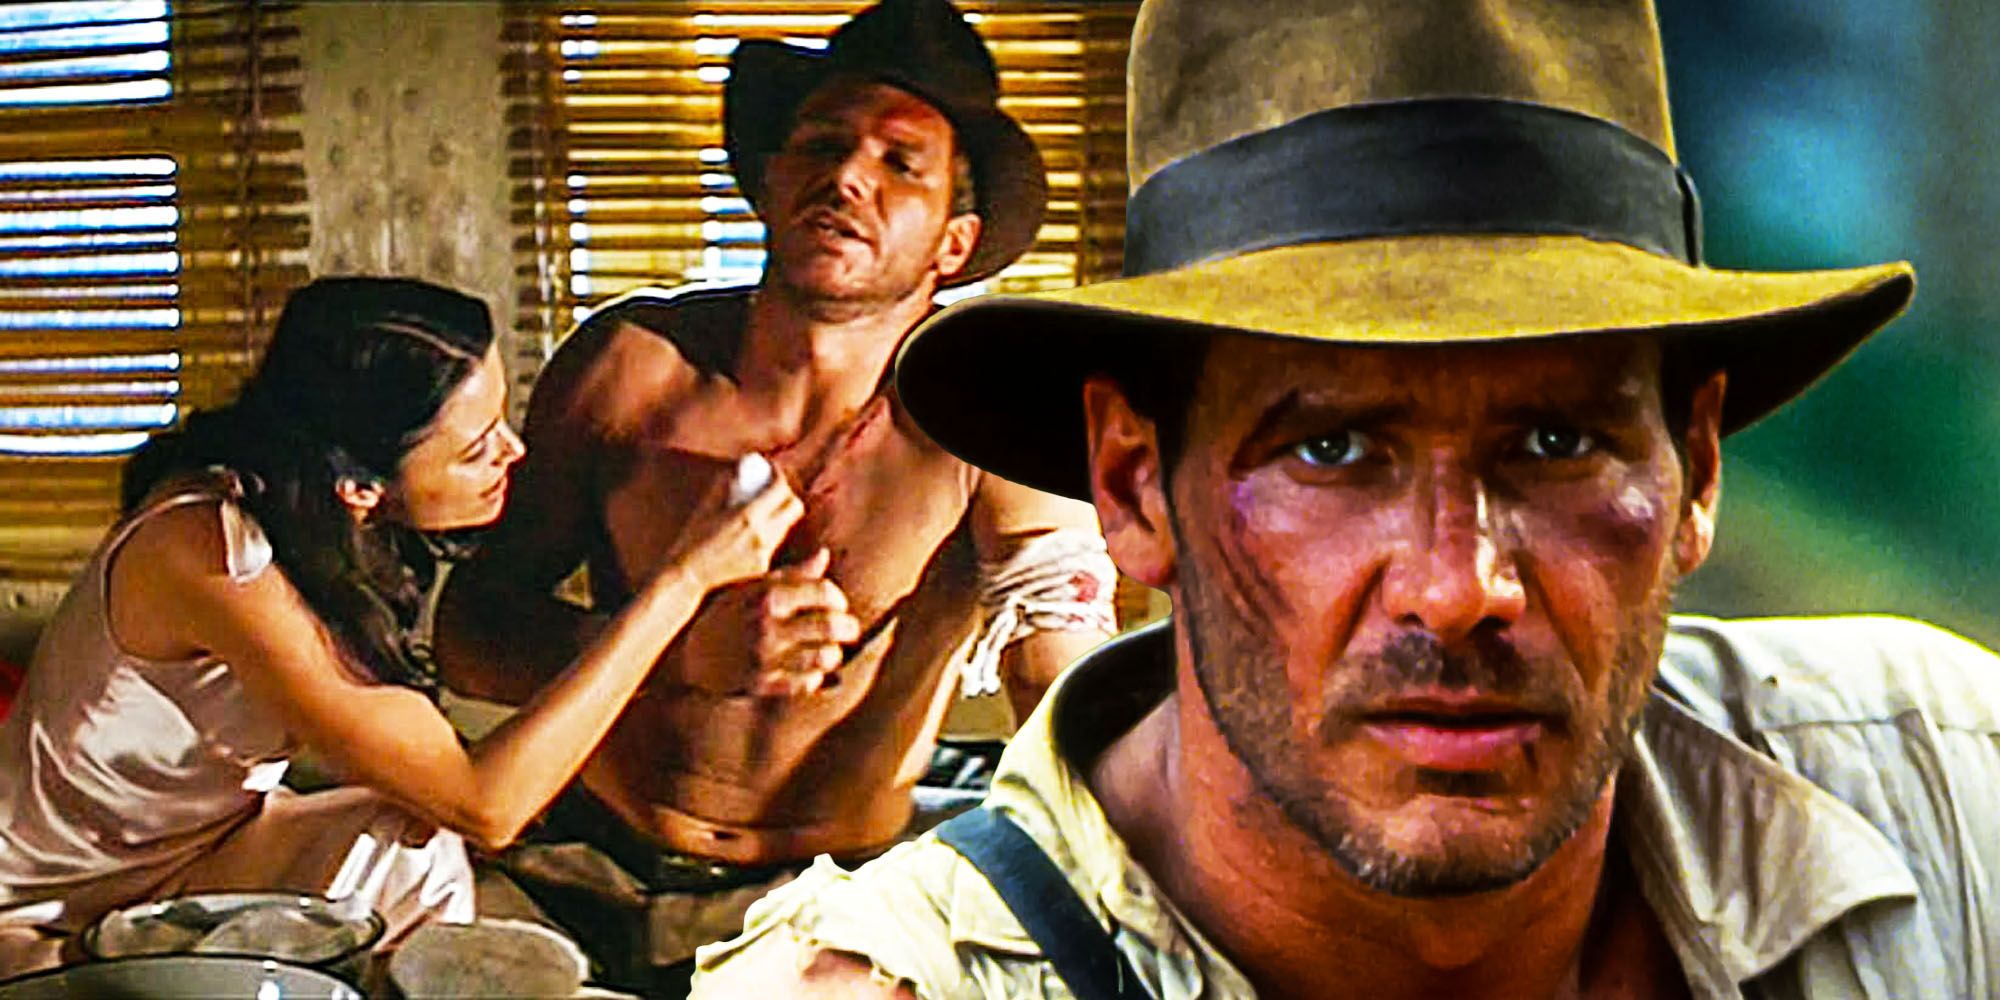 Raiders Of The Lost Arks Most Iconic Line Was AdLibbed By Harrison Ford